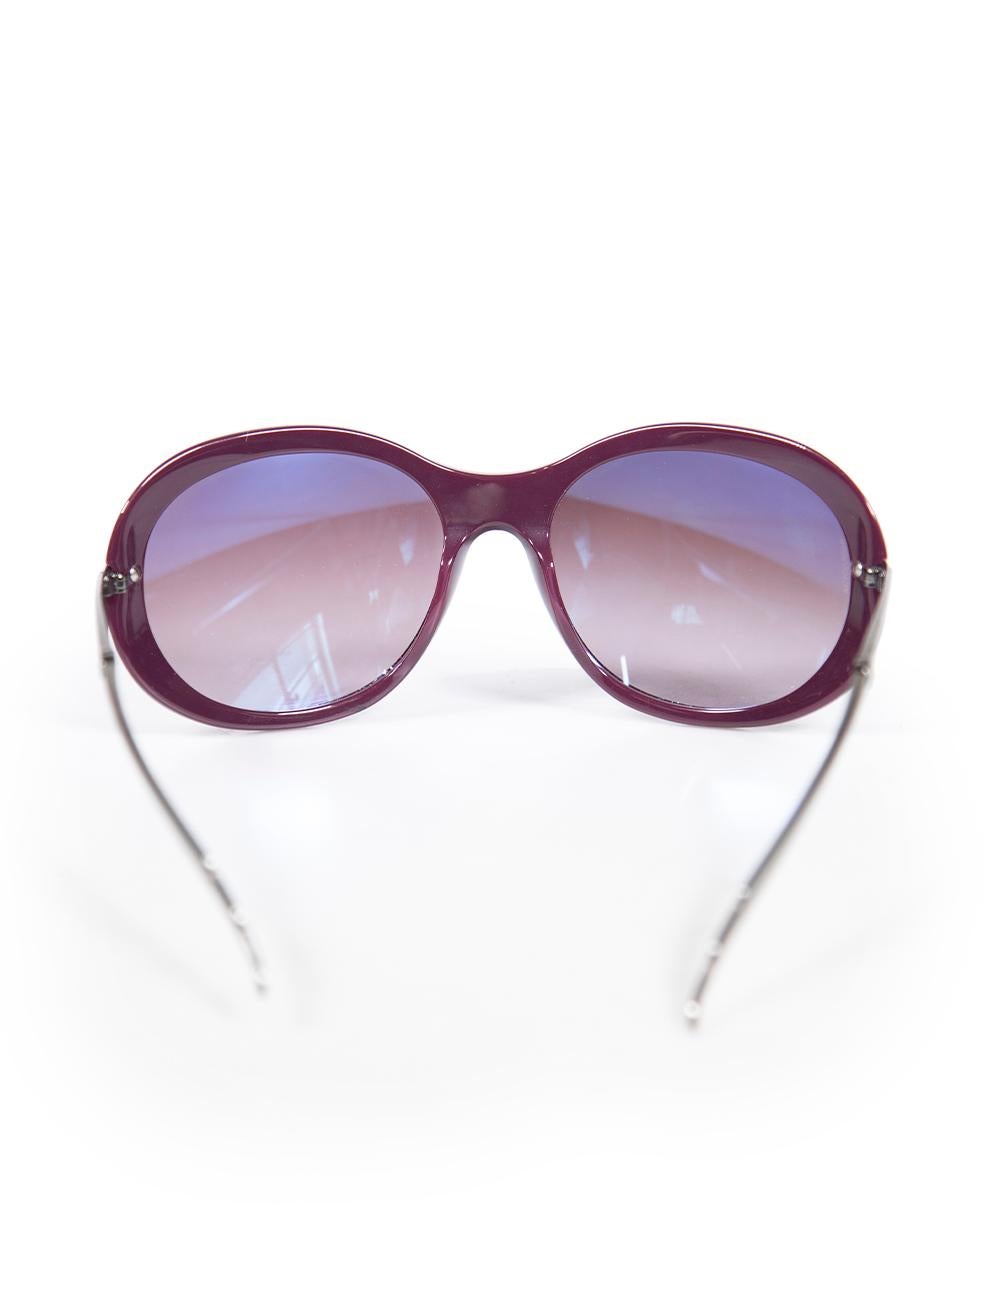 Chanel Purple C1068/3L CC Shooting Star Sunglasses In Excellent Condition For Sale In London, GB